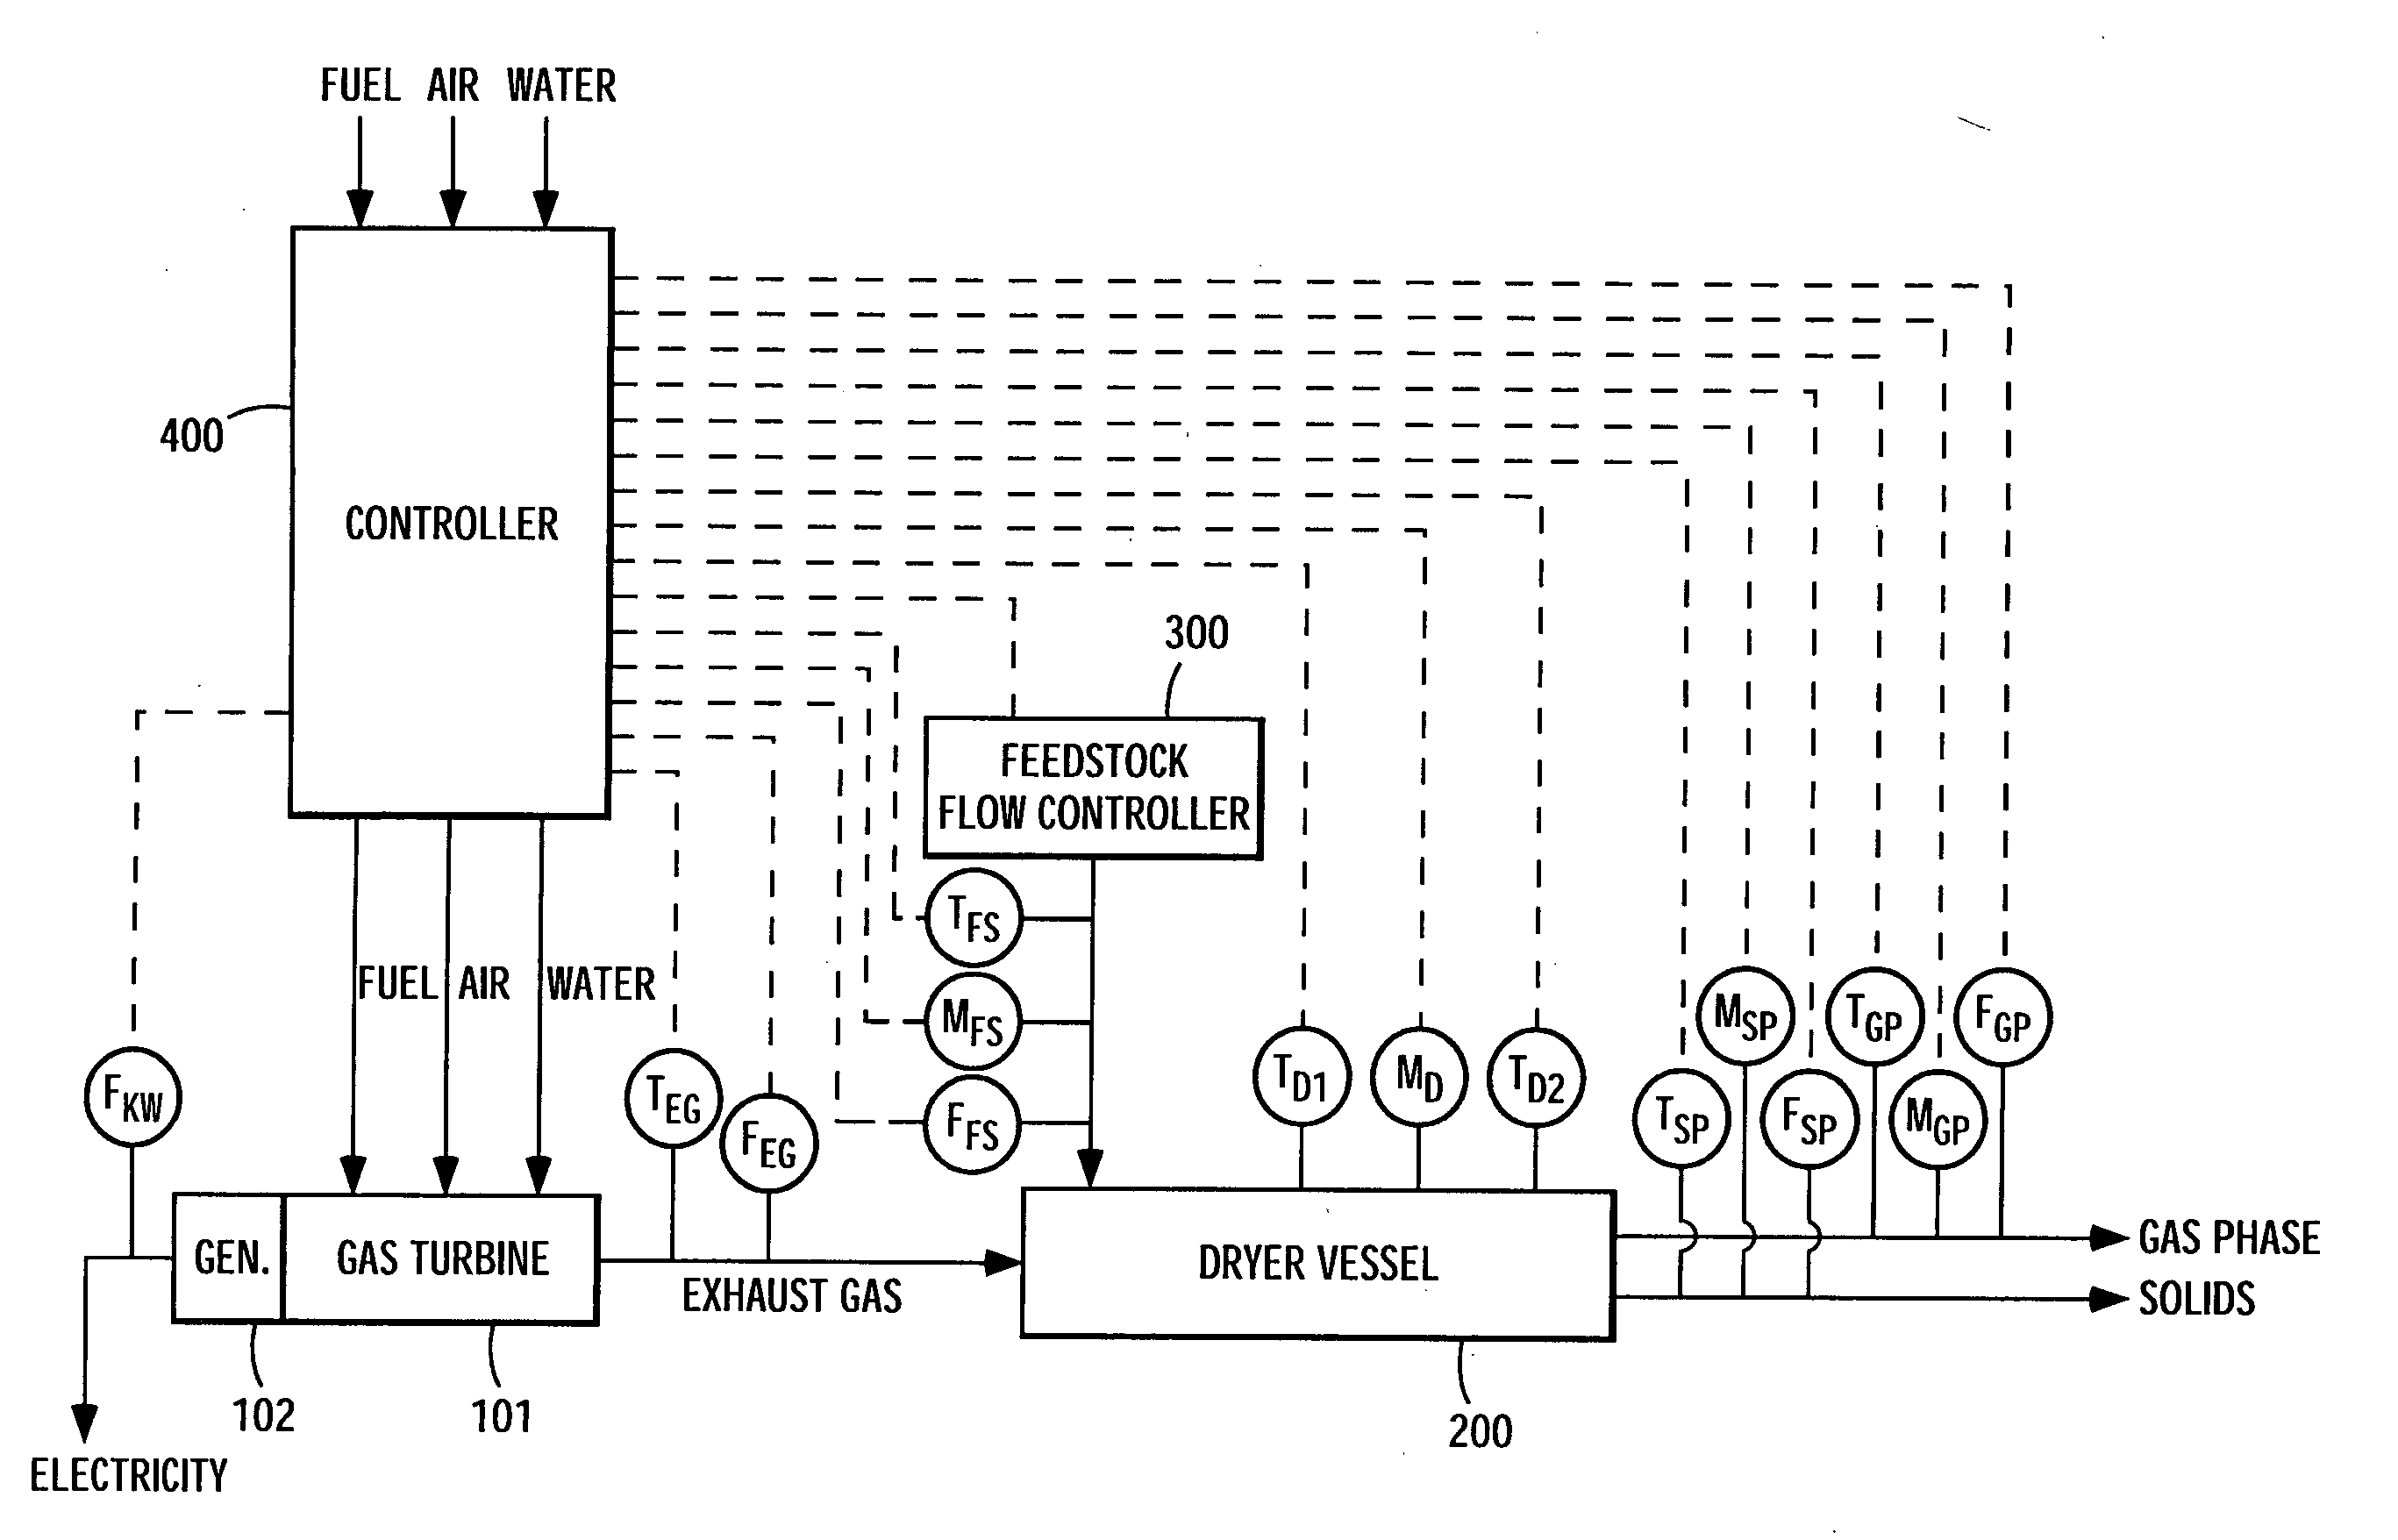 Control system for gas turbine in material treatment unit